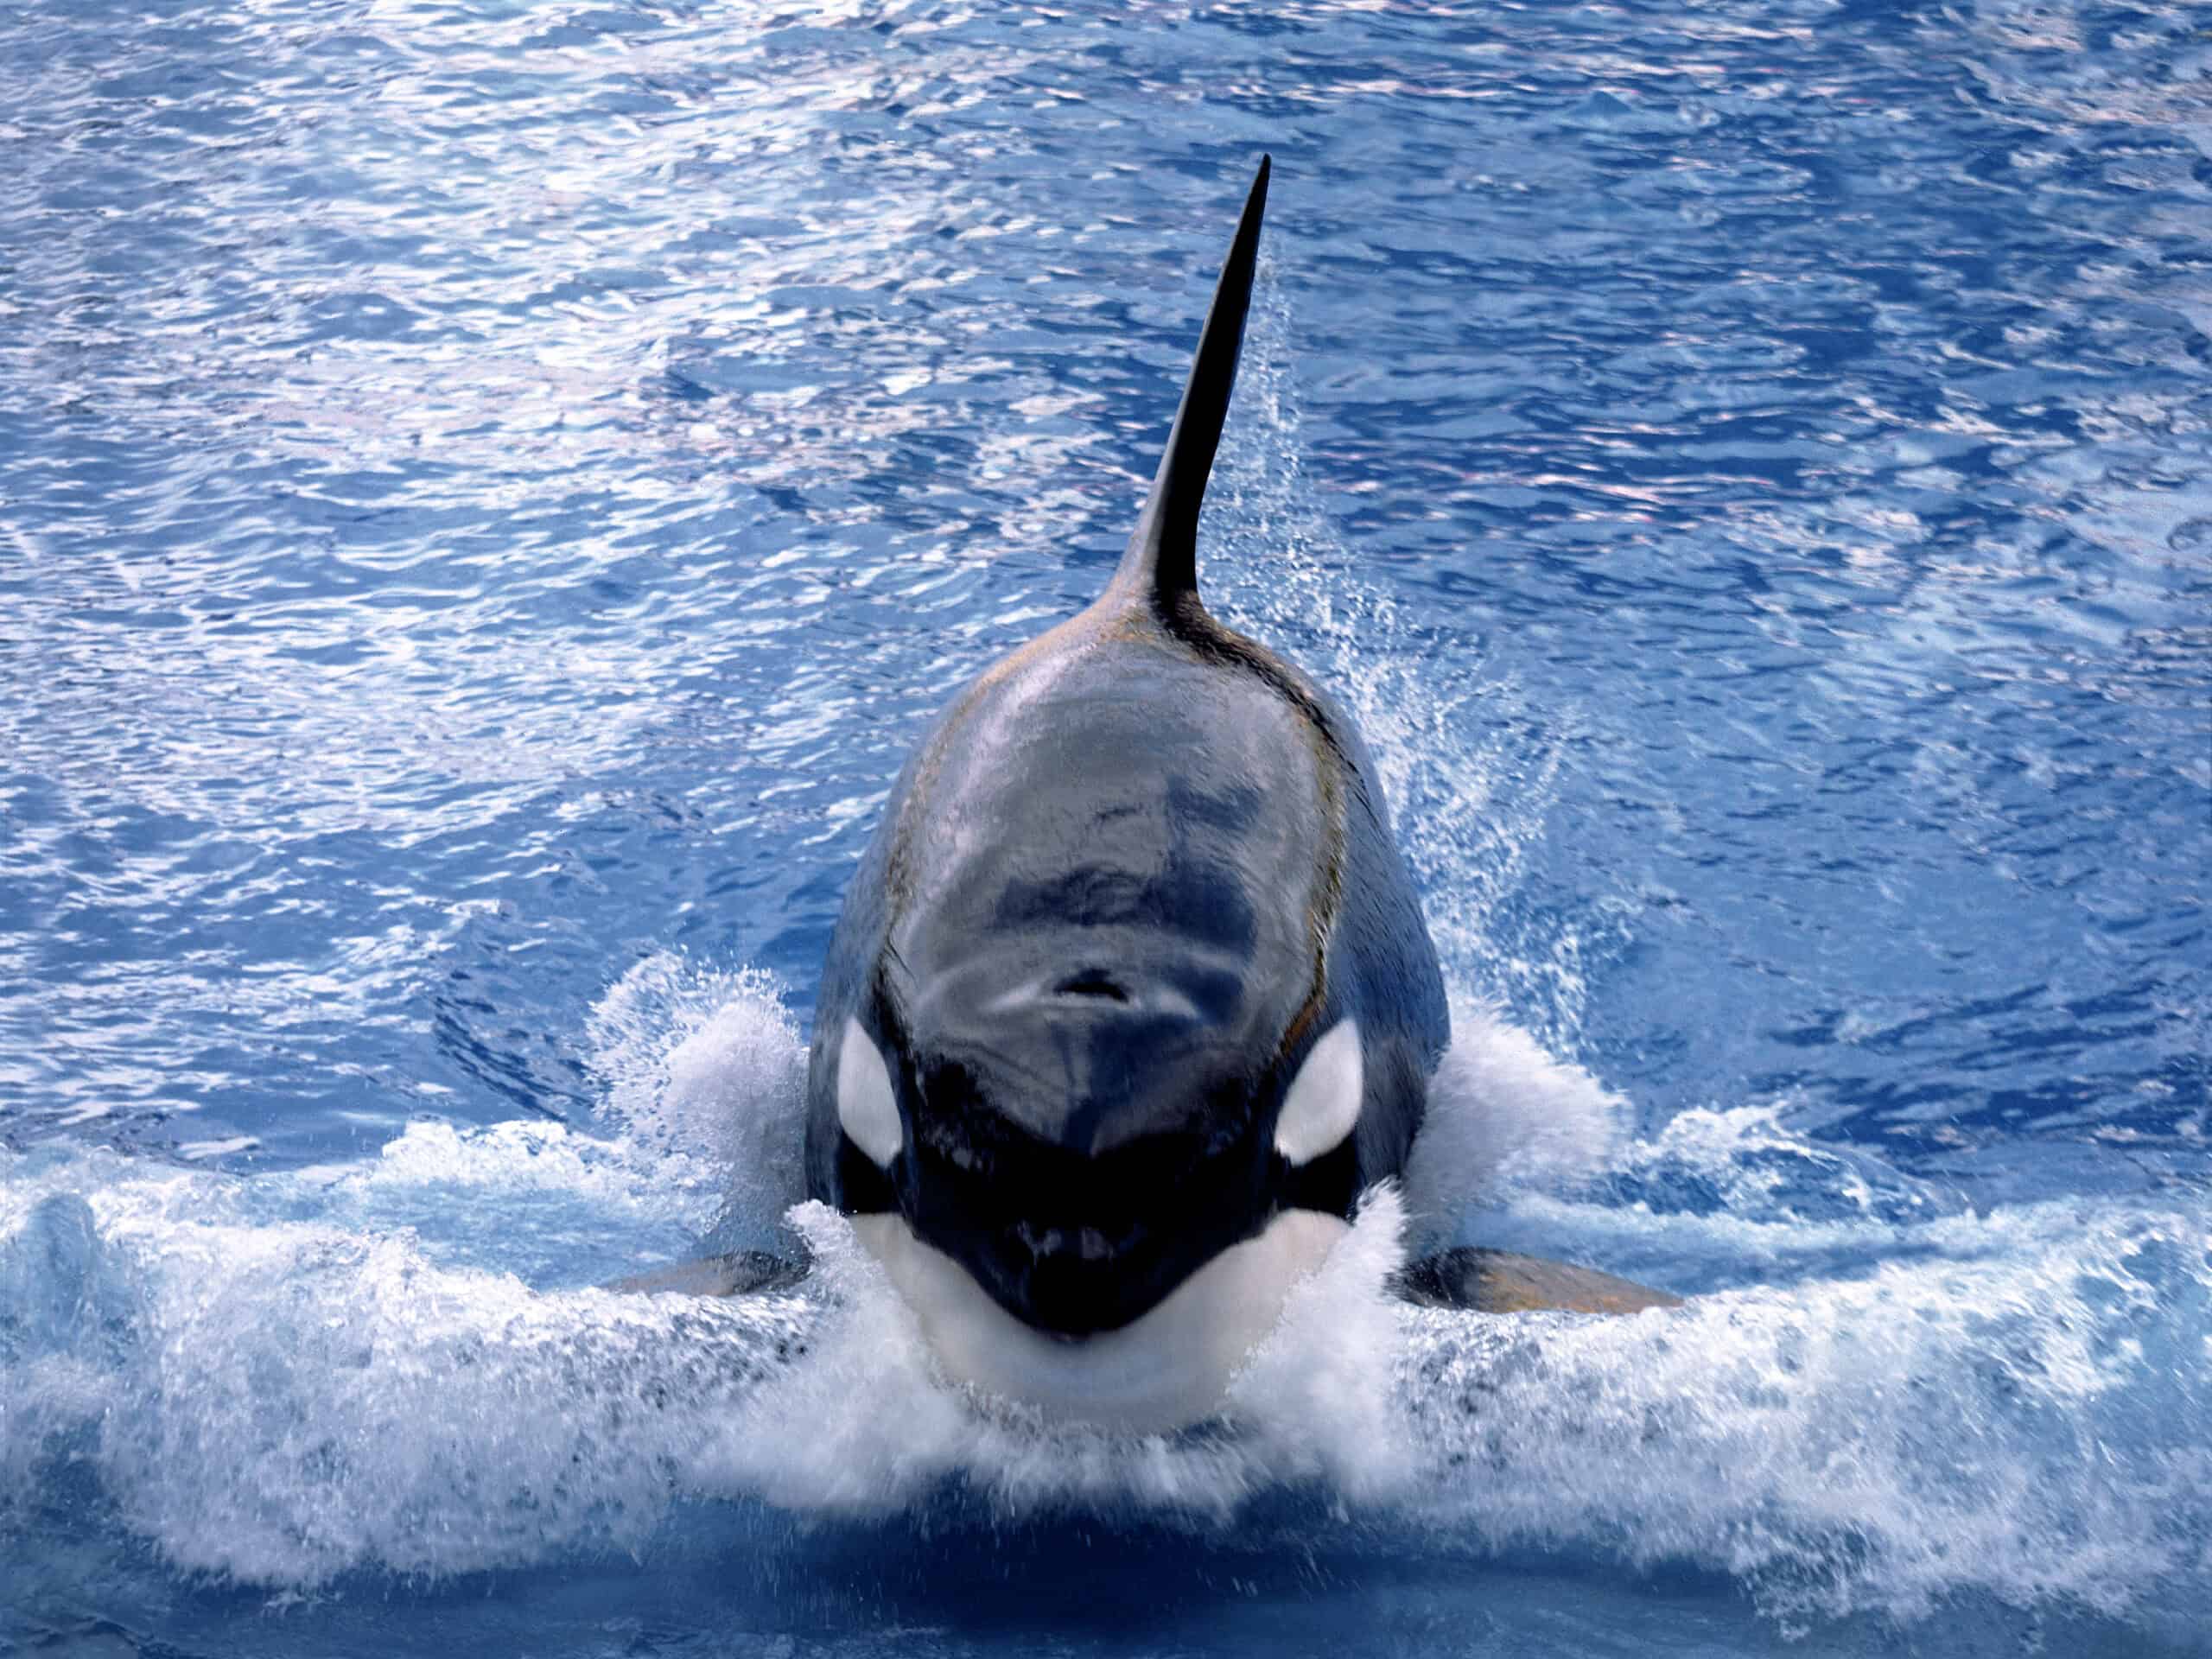 <p>The average orca, also known as the killer whale, is between 23 and 32 feet in length. And weighs around 8,800 pounds – which is not small at all! </p>           Sharks, lions, tigers, as well as all about cats & dogs!           <a href='https://www.msn.com/en-us/channel/source/Animals%20Around%20The%20Globe%20US/sr-vid-ryujycftmyx7d7tmb5trkya28raxe6r56iuty5739ky2rf5d5wws?ocid=anaheim-ntp-following&cvid=1ff21e393be1475a8b3dd9a83a86b8df&ei=10'>           Click here to get to the Animals Around The Globe profile page</a><b> and hit "Follow" to never miss out.</b>